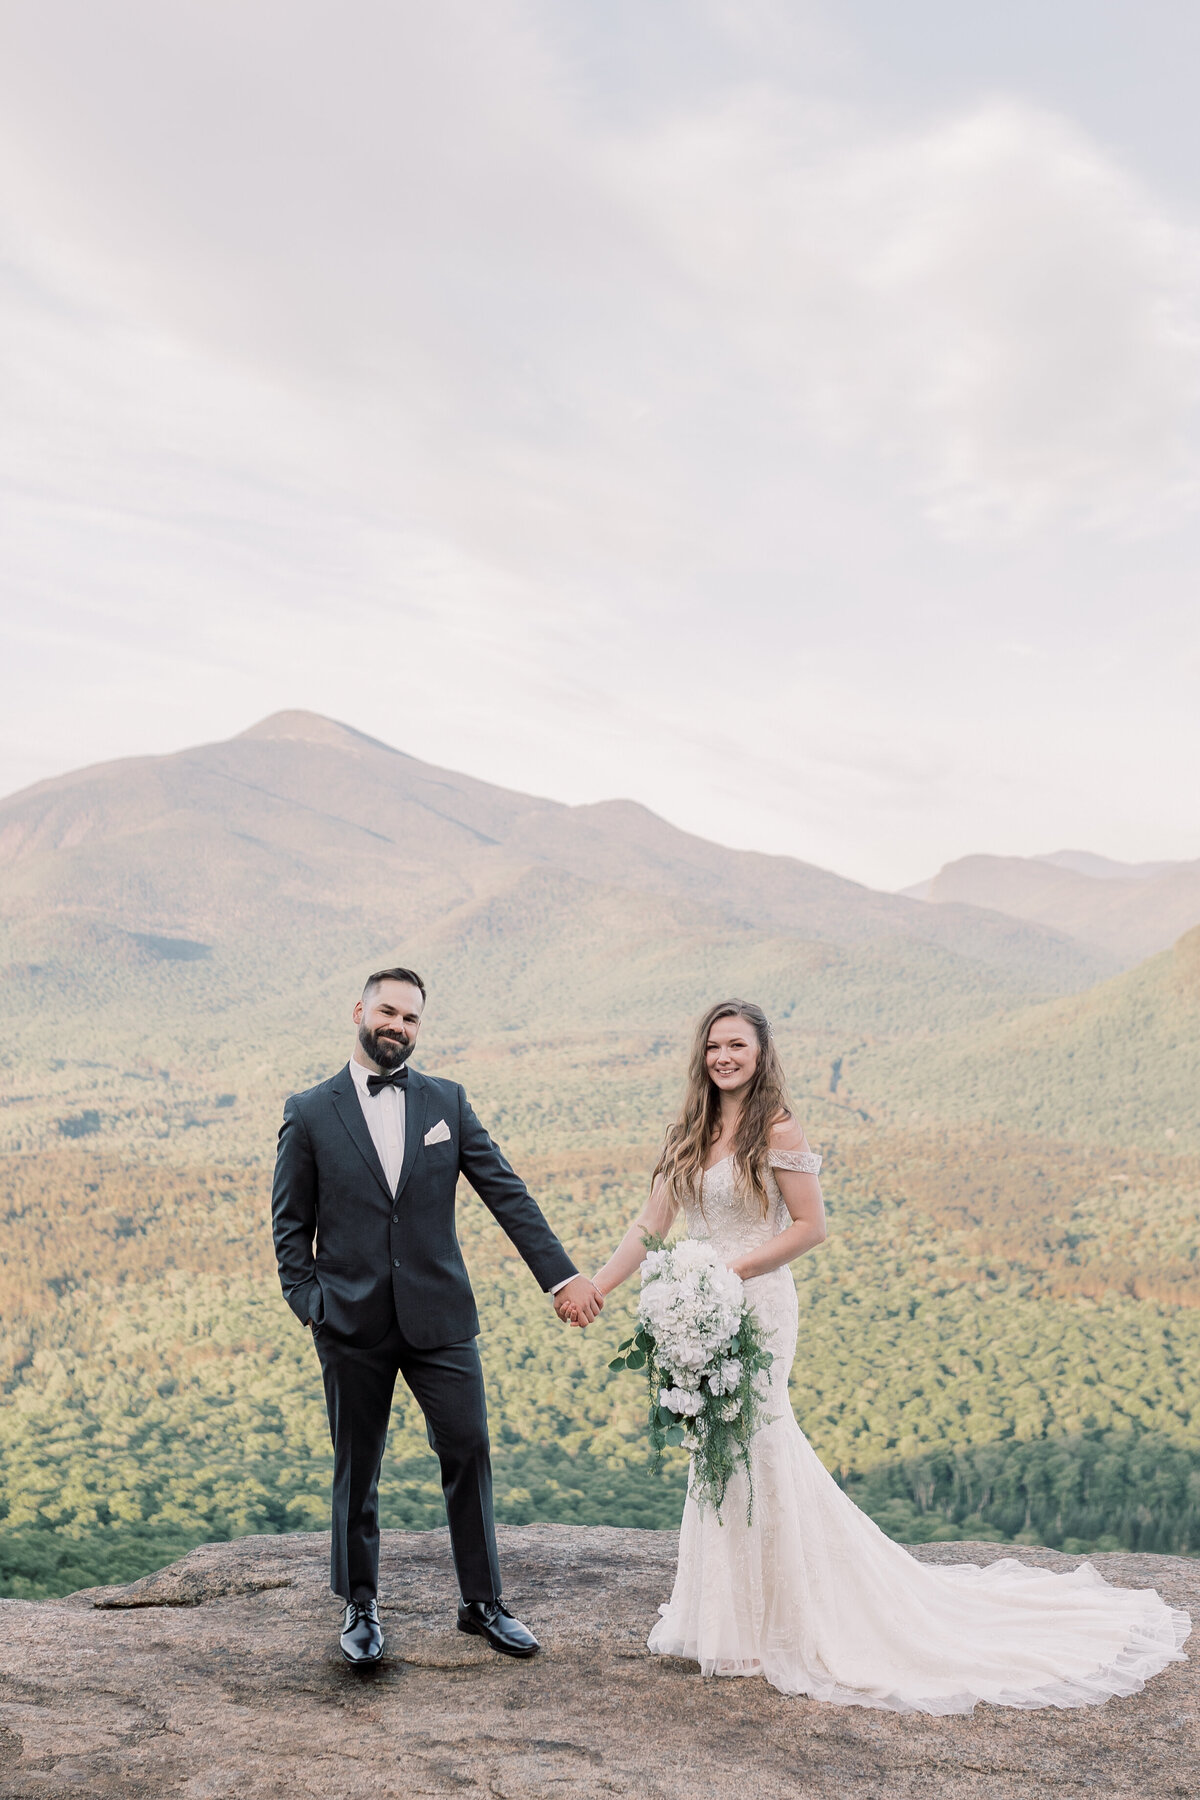 Bride and Groom standing on top of a mountain in the Adirondacks celebrating their elopement at sunrise.